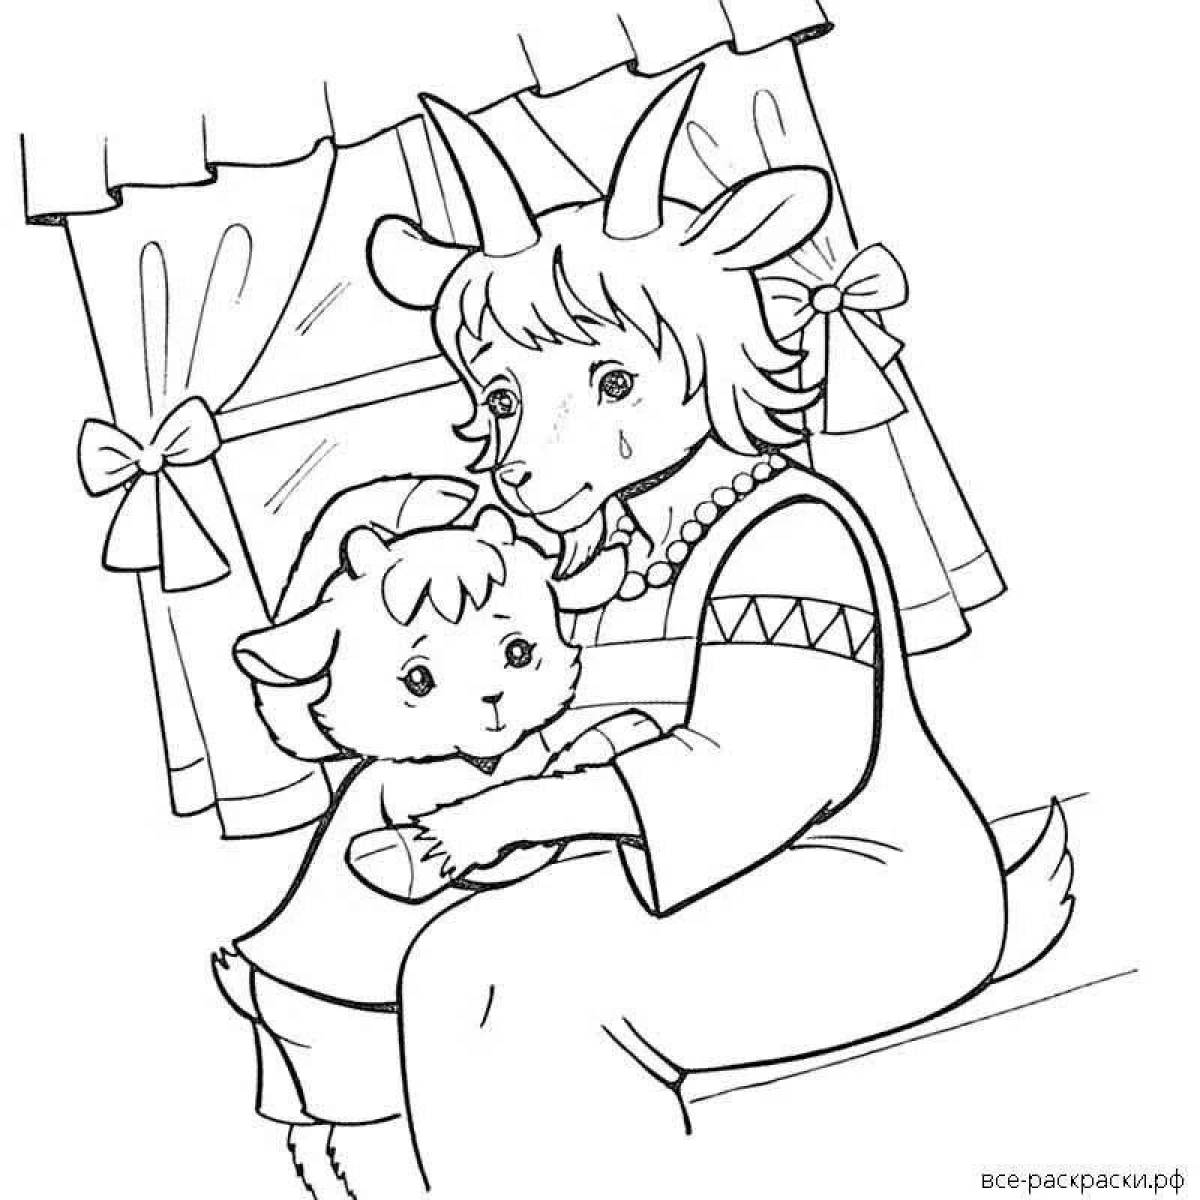 Color-frenzy coloring page 7 kids